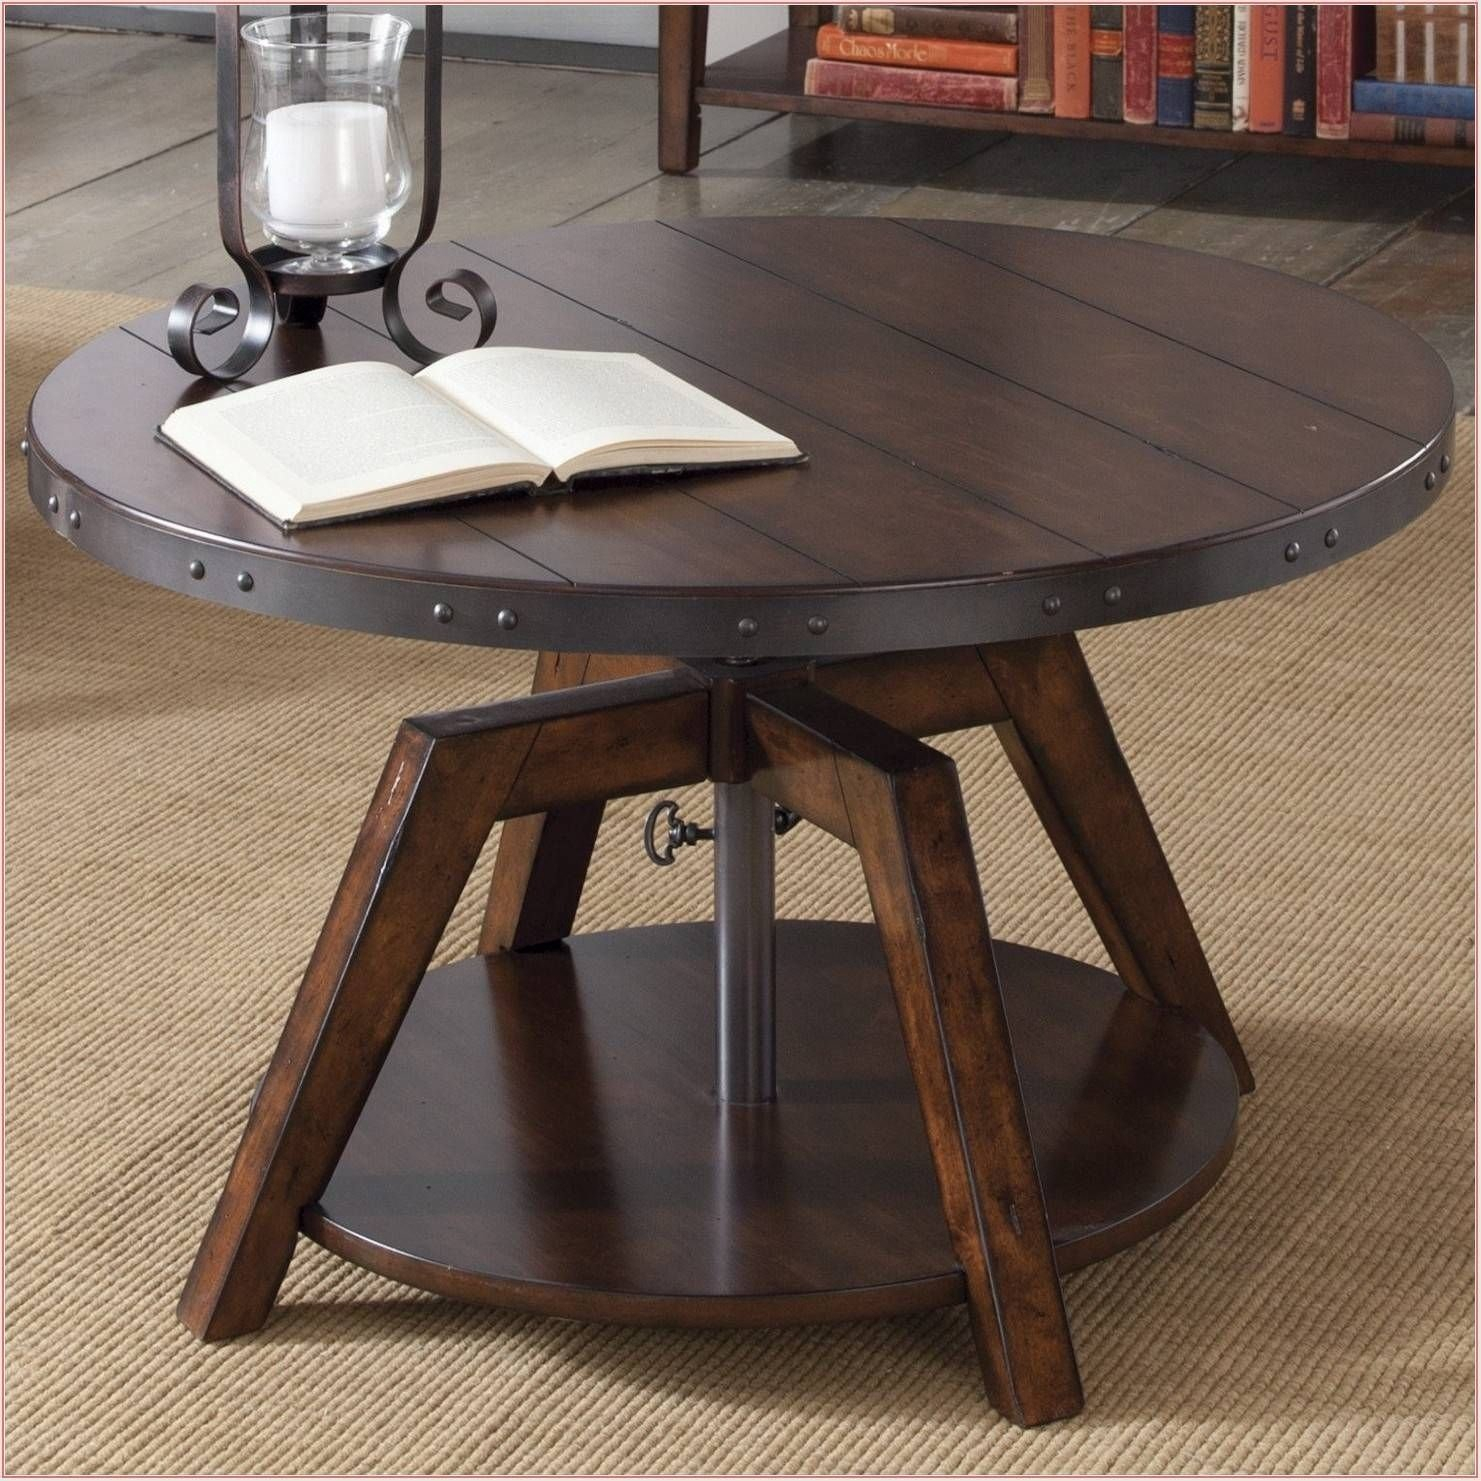 50 Amazing Convertible Coffee Table To Dining Table Up To 70 Off throughout dimensions 1481 X 1481